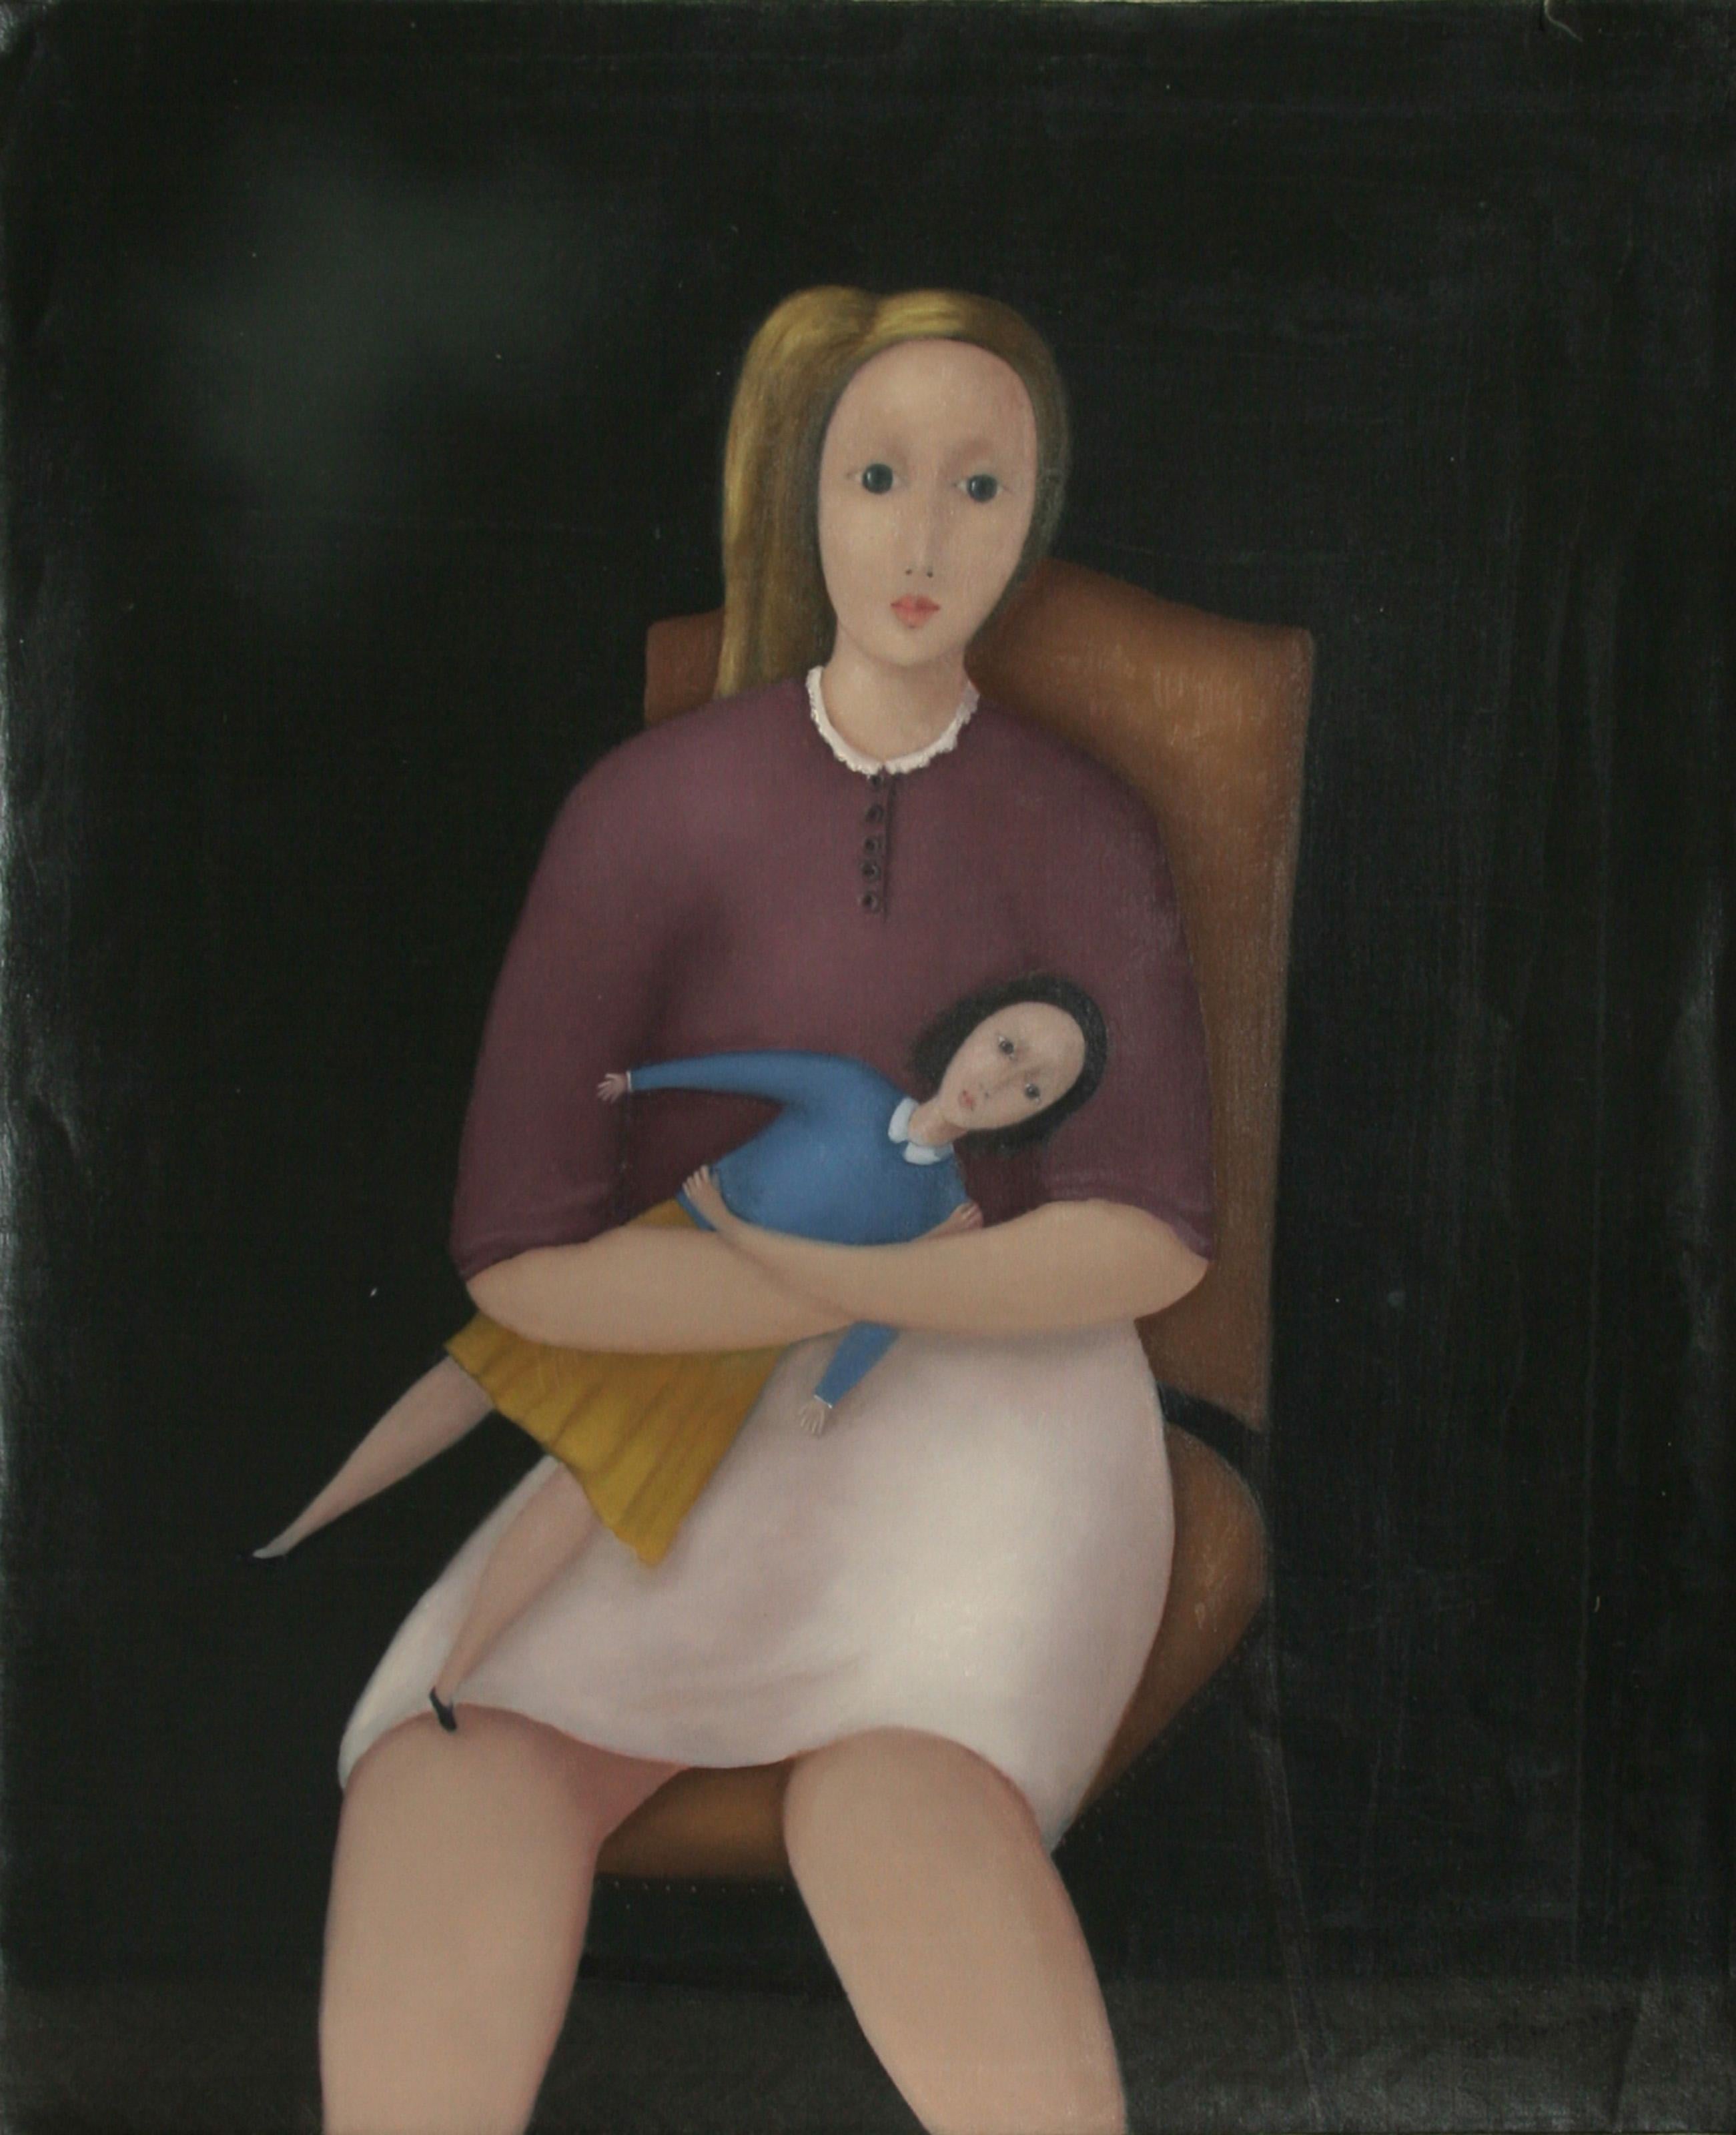 Branko Bahunek, Croatian (1935 - ) -  Girl and her Doll. Year: 1992, Medium: Oil on Canvas, Size: 28.5 in. x 23 in. (72.39 cm x 58.42 cm) 